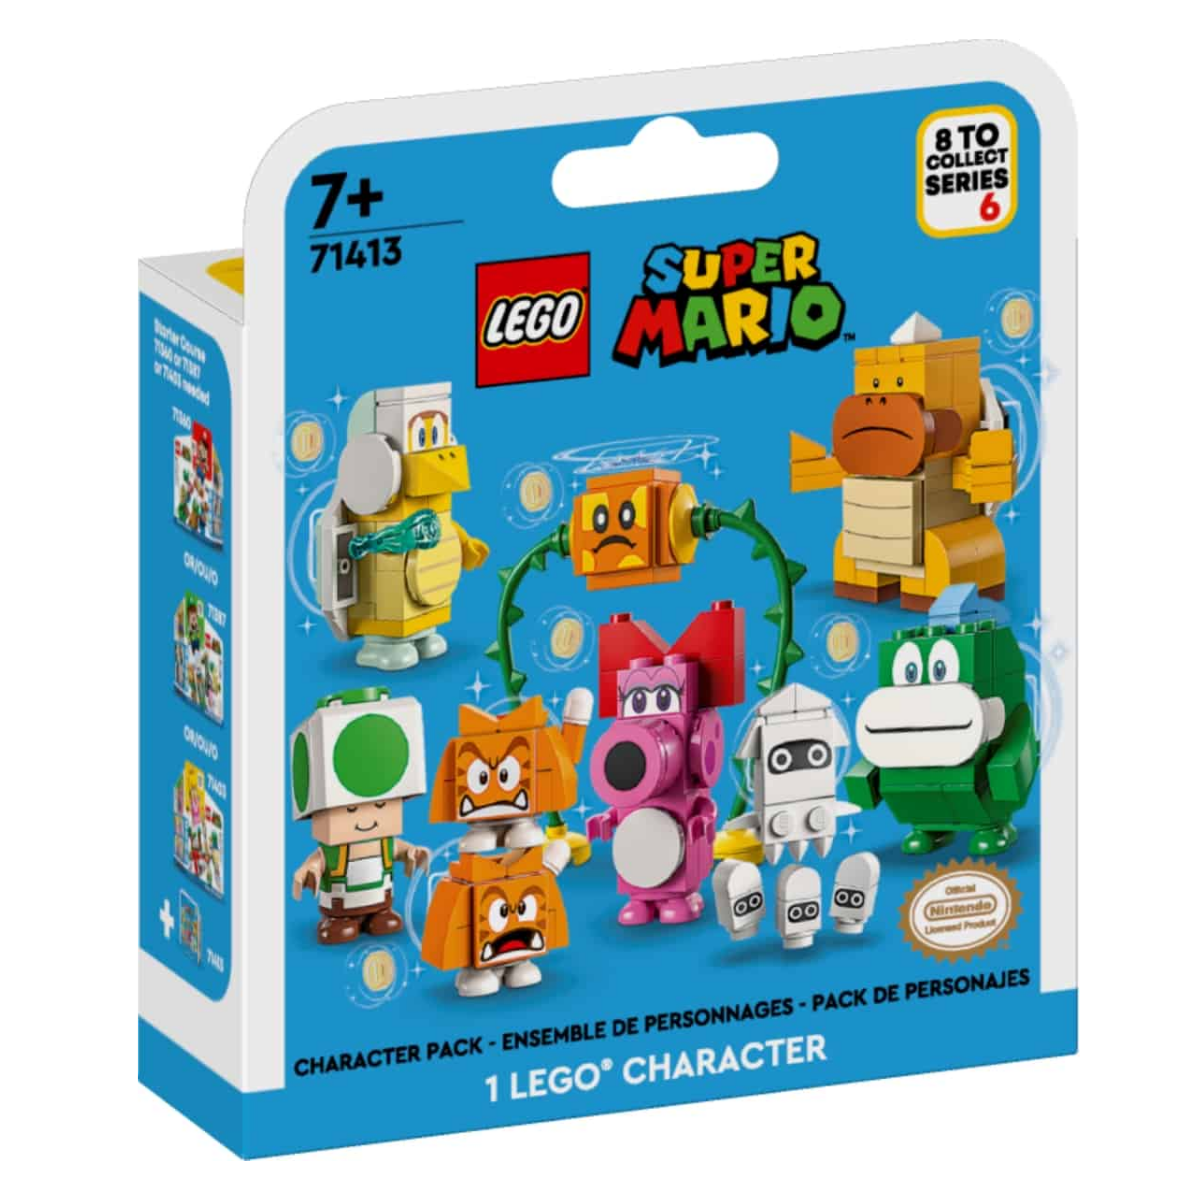 Lego Super Mario 8 to collect series 1 character